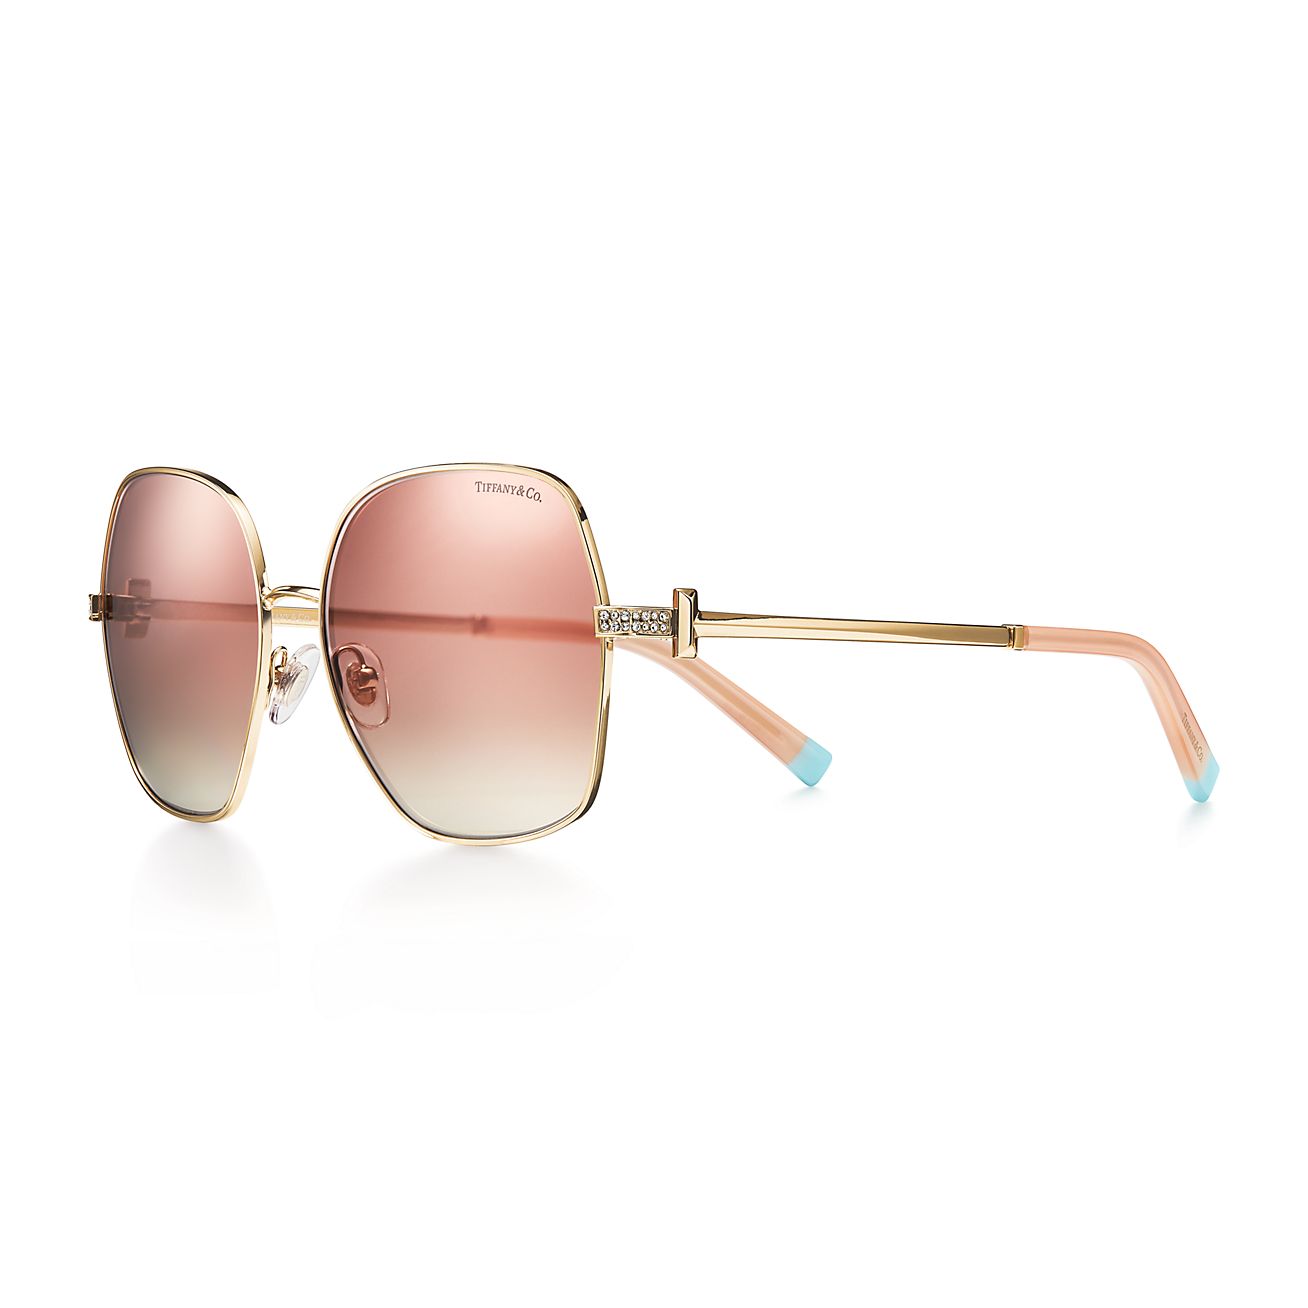 Tiffany T Sunglasses in Pale Gold-colored Metal with Pink Mirrored ...